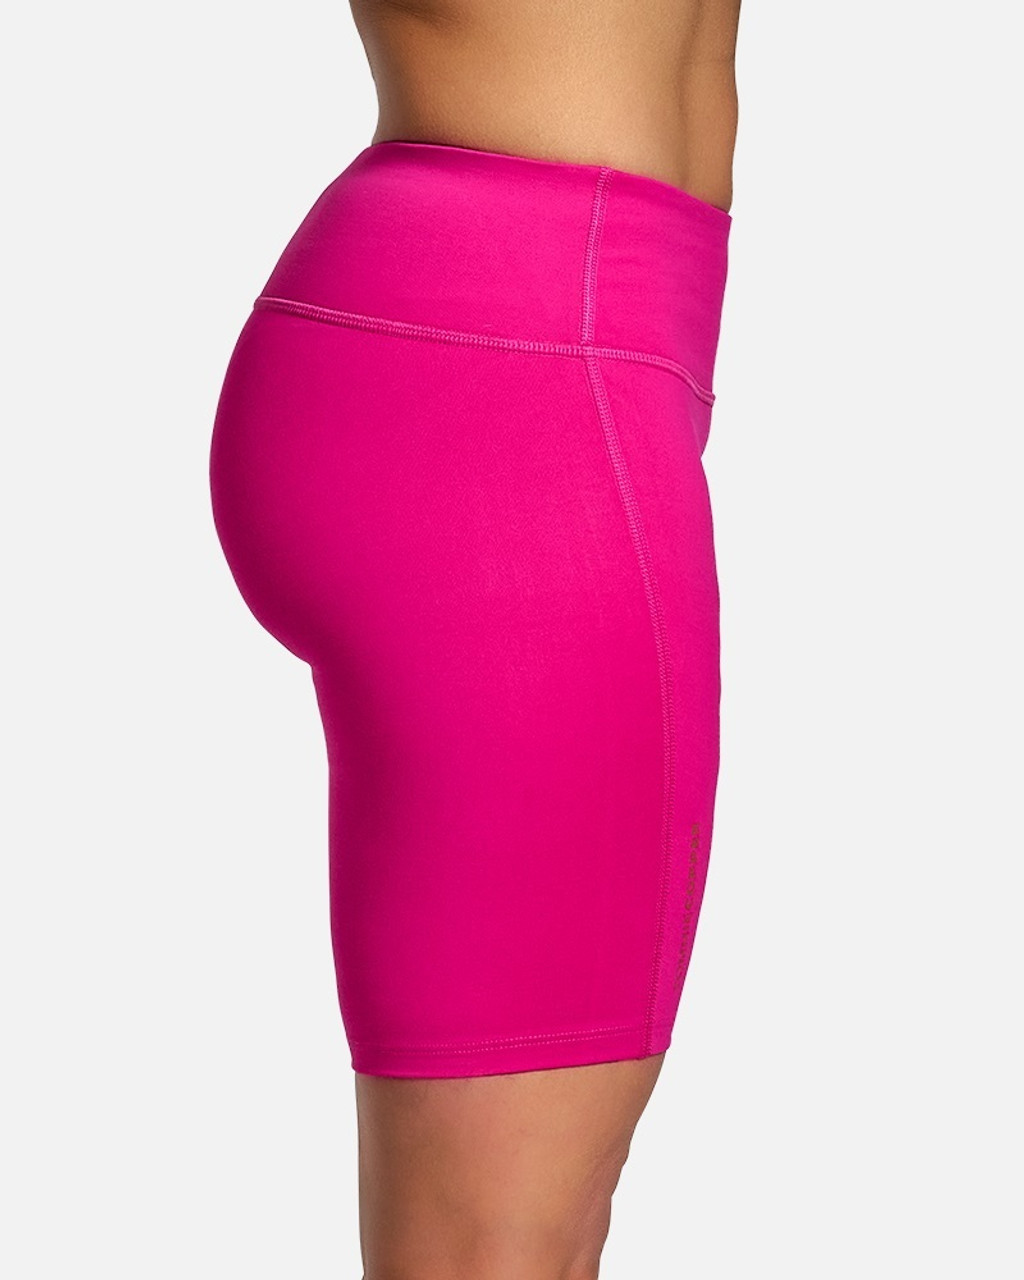 A4 Womens 4 Compression Shorts